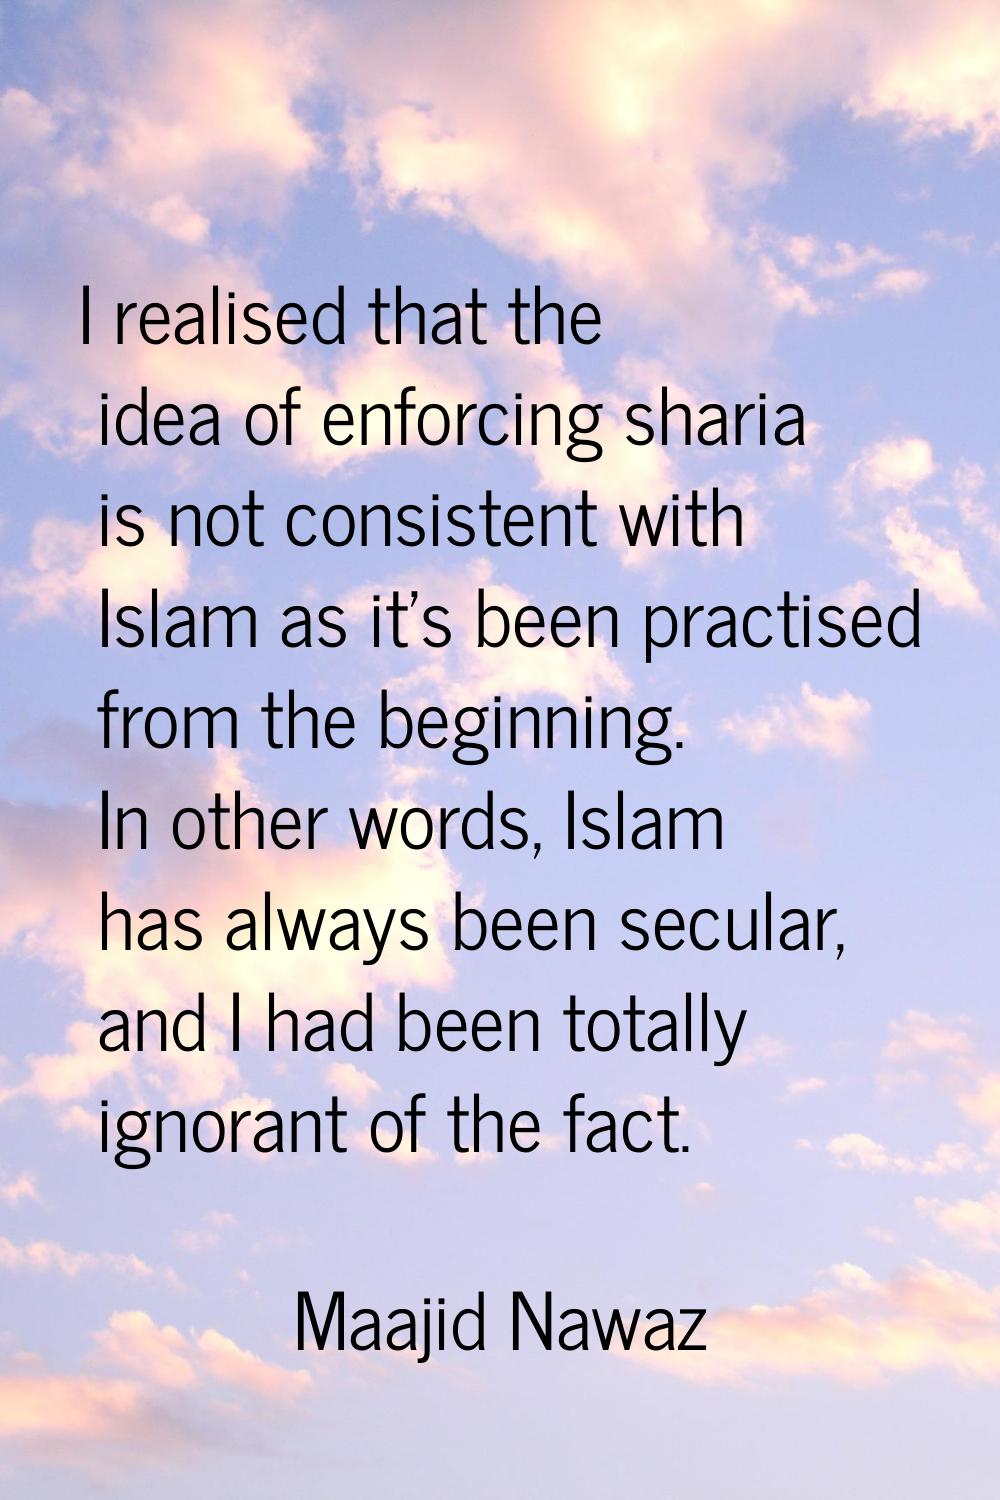 I realised that the idea of enforcing sharia is not consistent with Islam as it's been practised fr